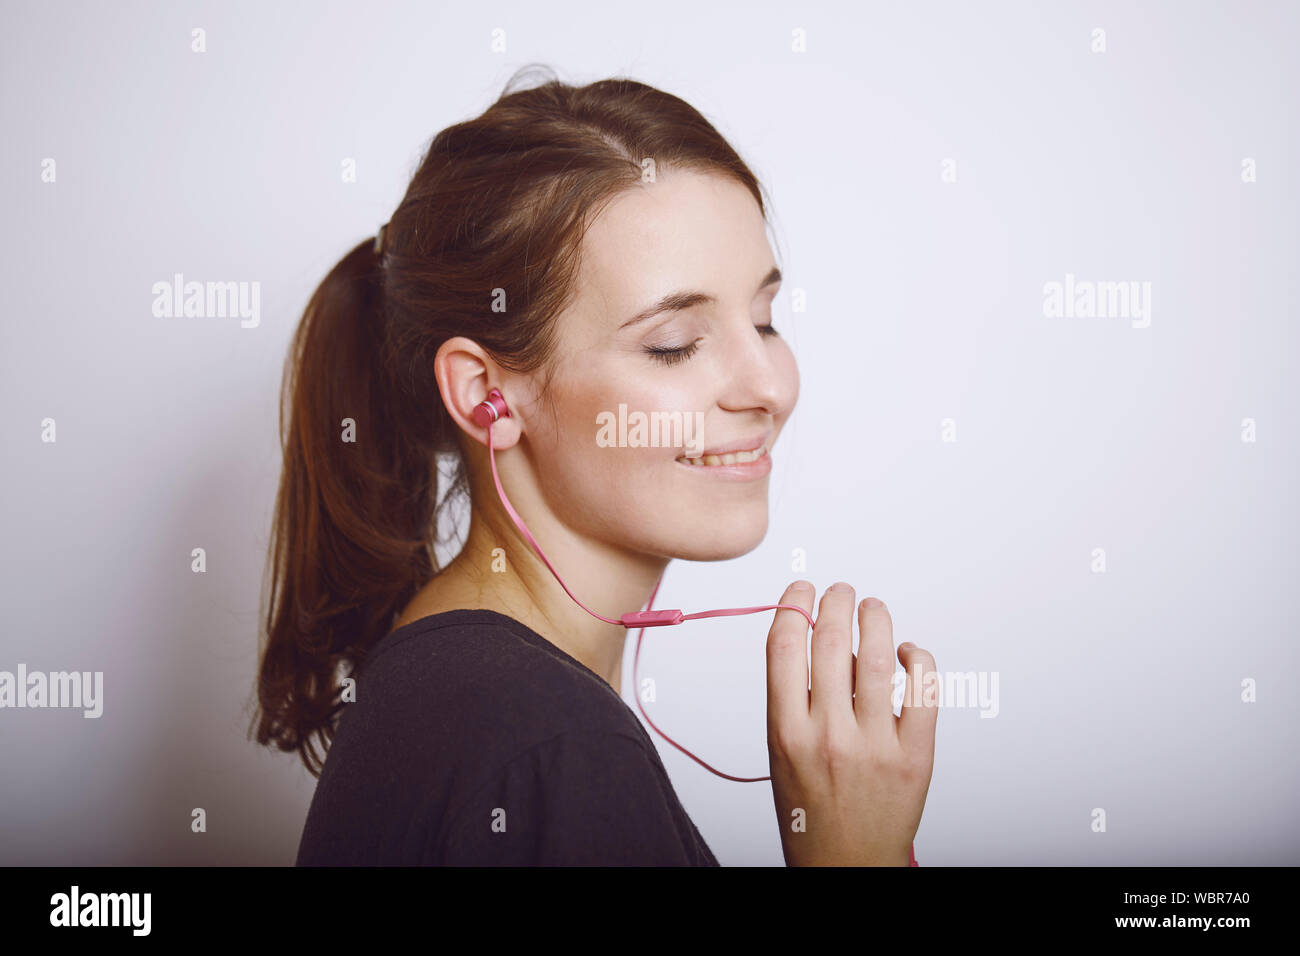 Young Woman Holding In-ear Headphones Over White Background Stock Photo